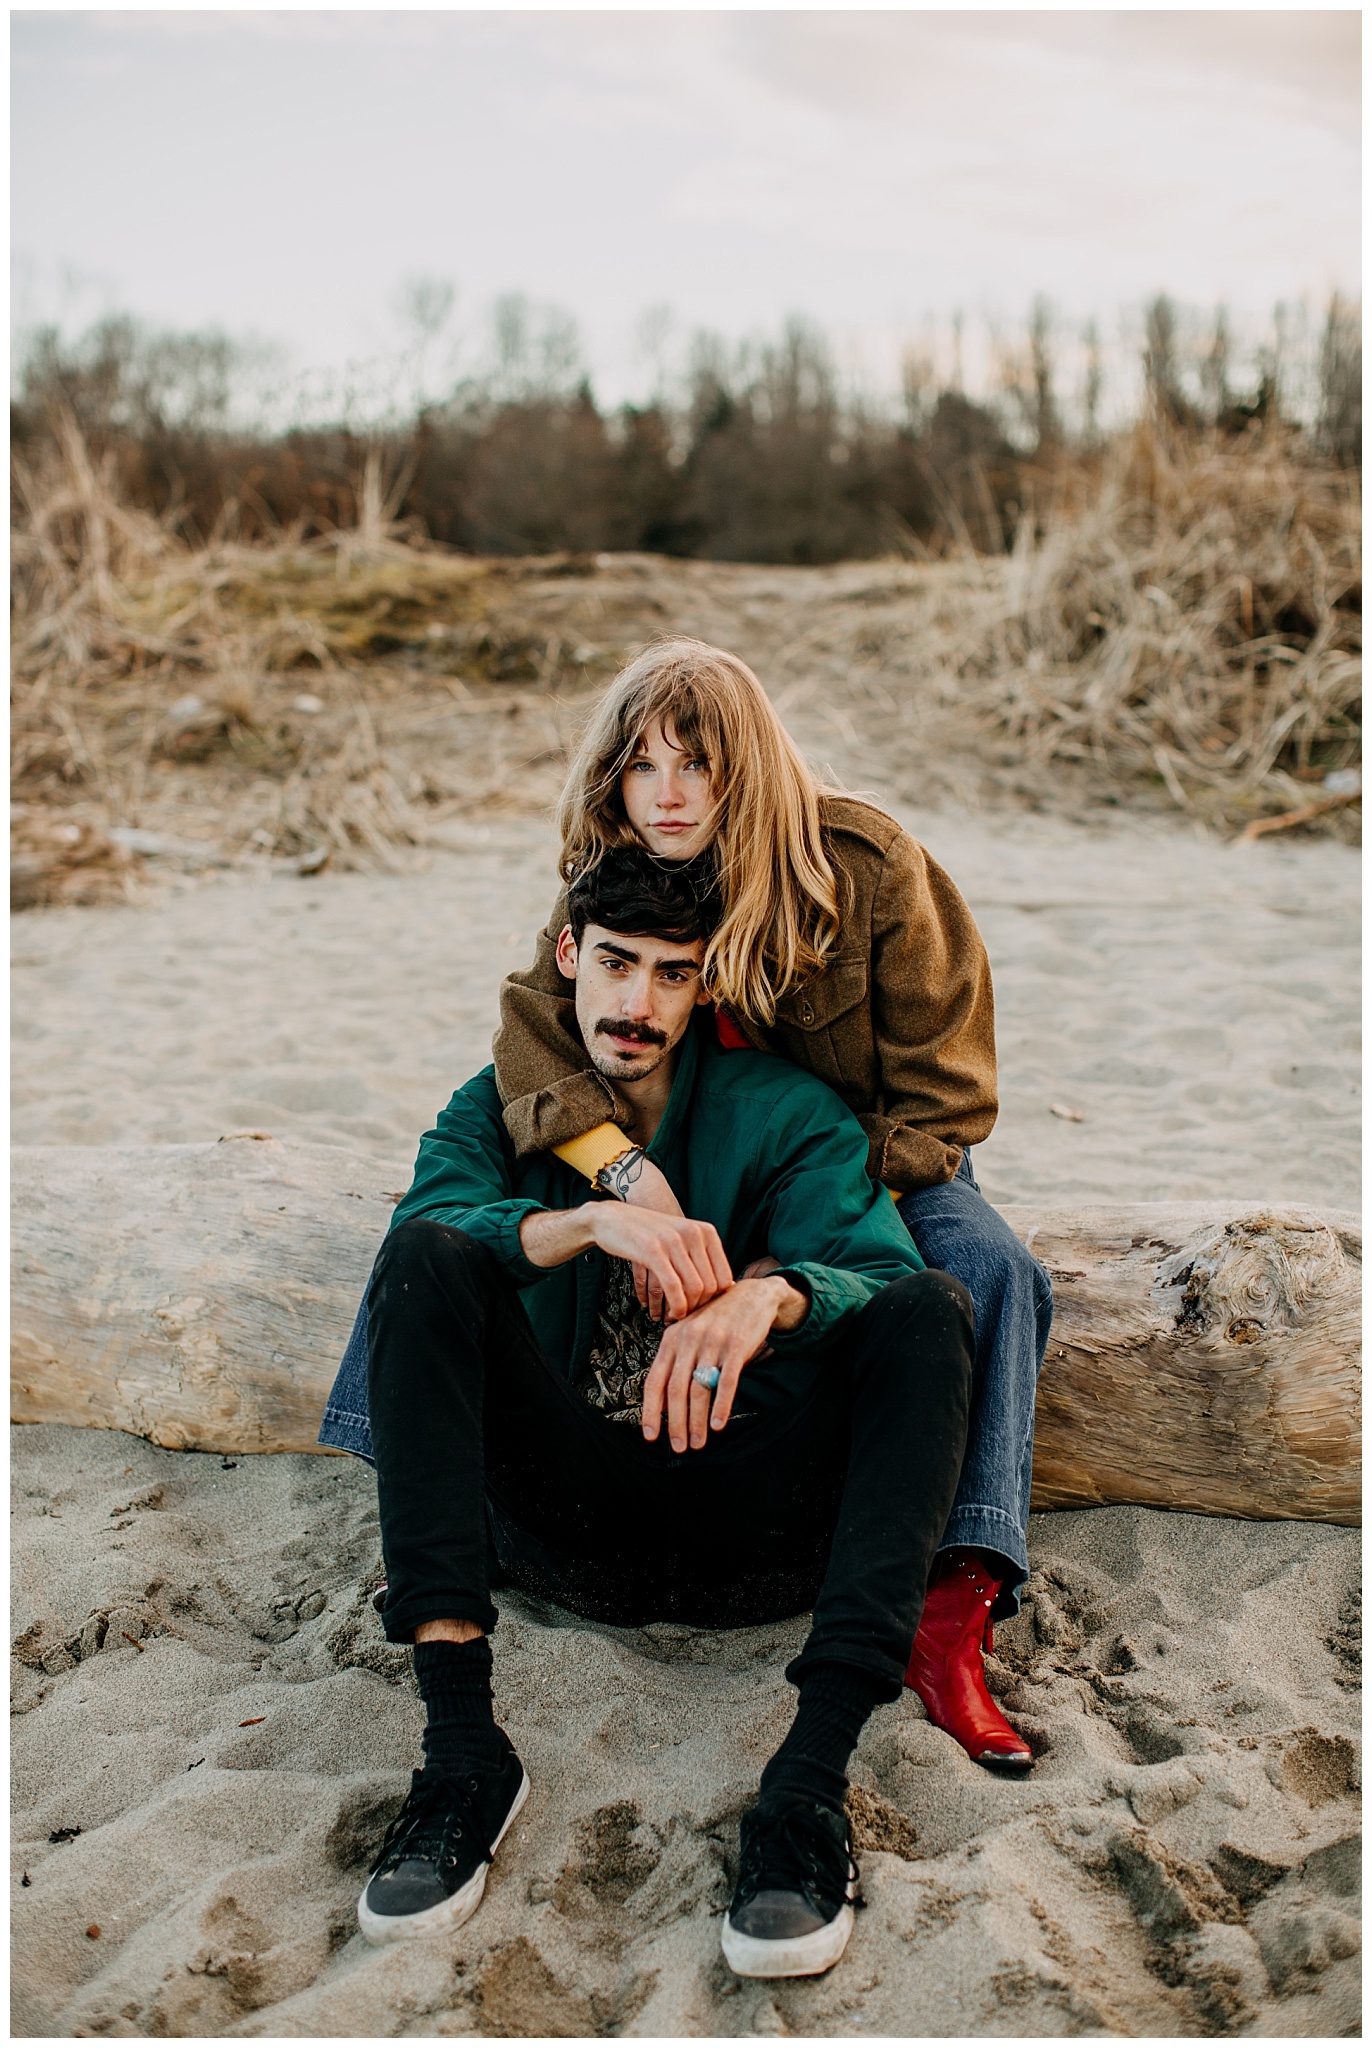 editorial 70s inspired engagement session at jericho beach vancouver